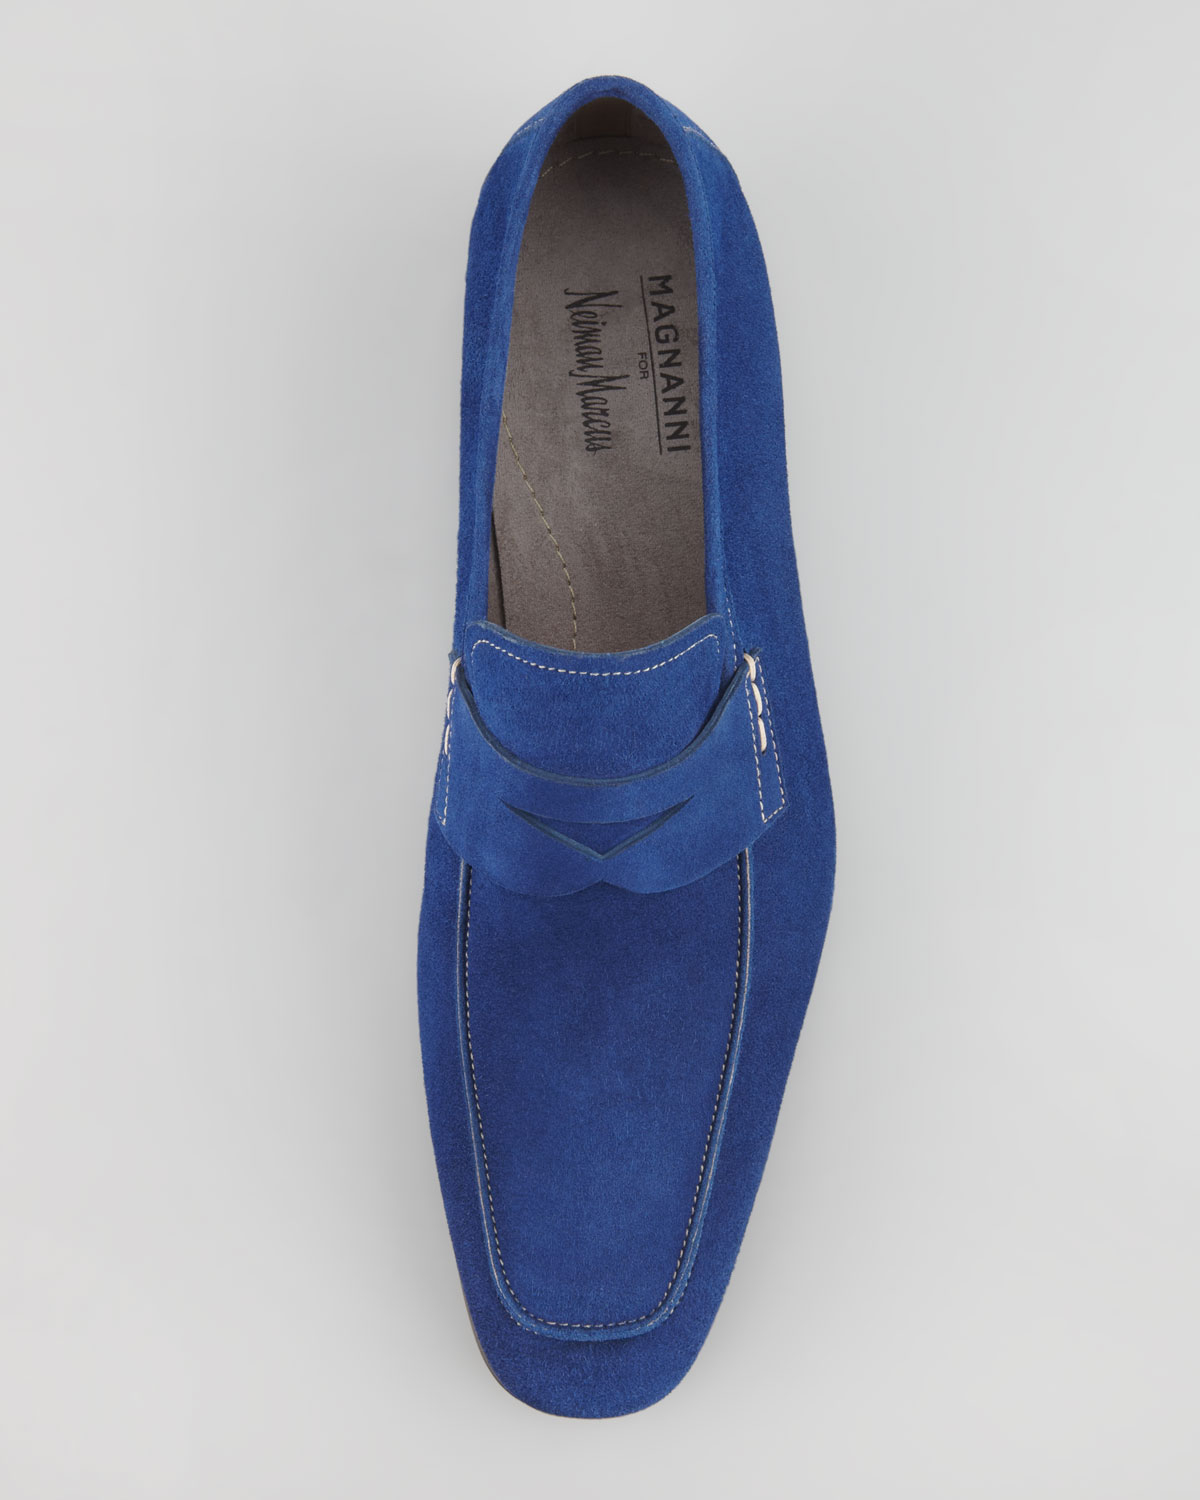 Neiman Marcus Suede Penny Loafer Royal 